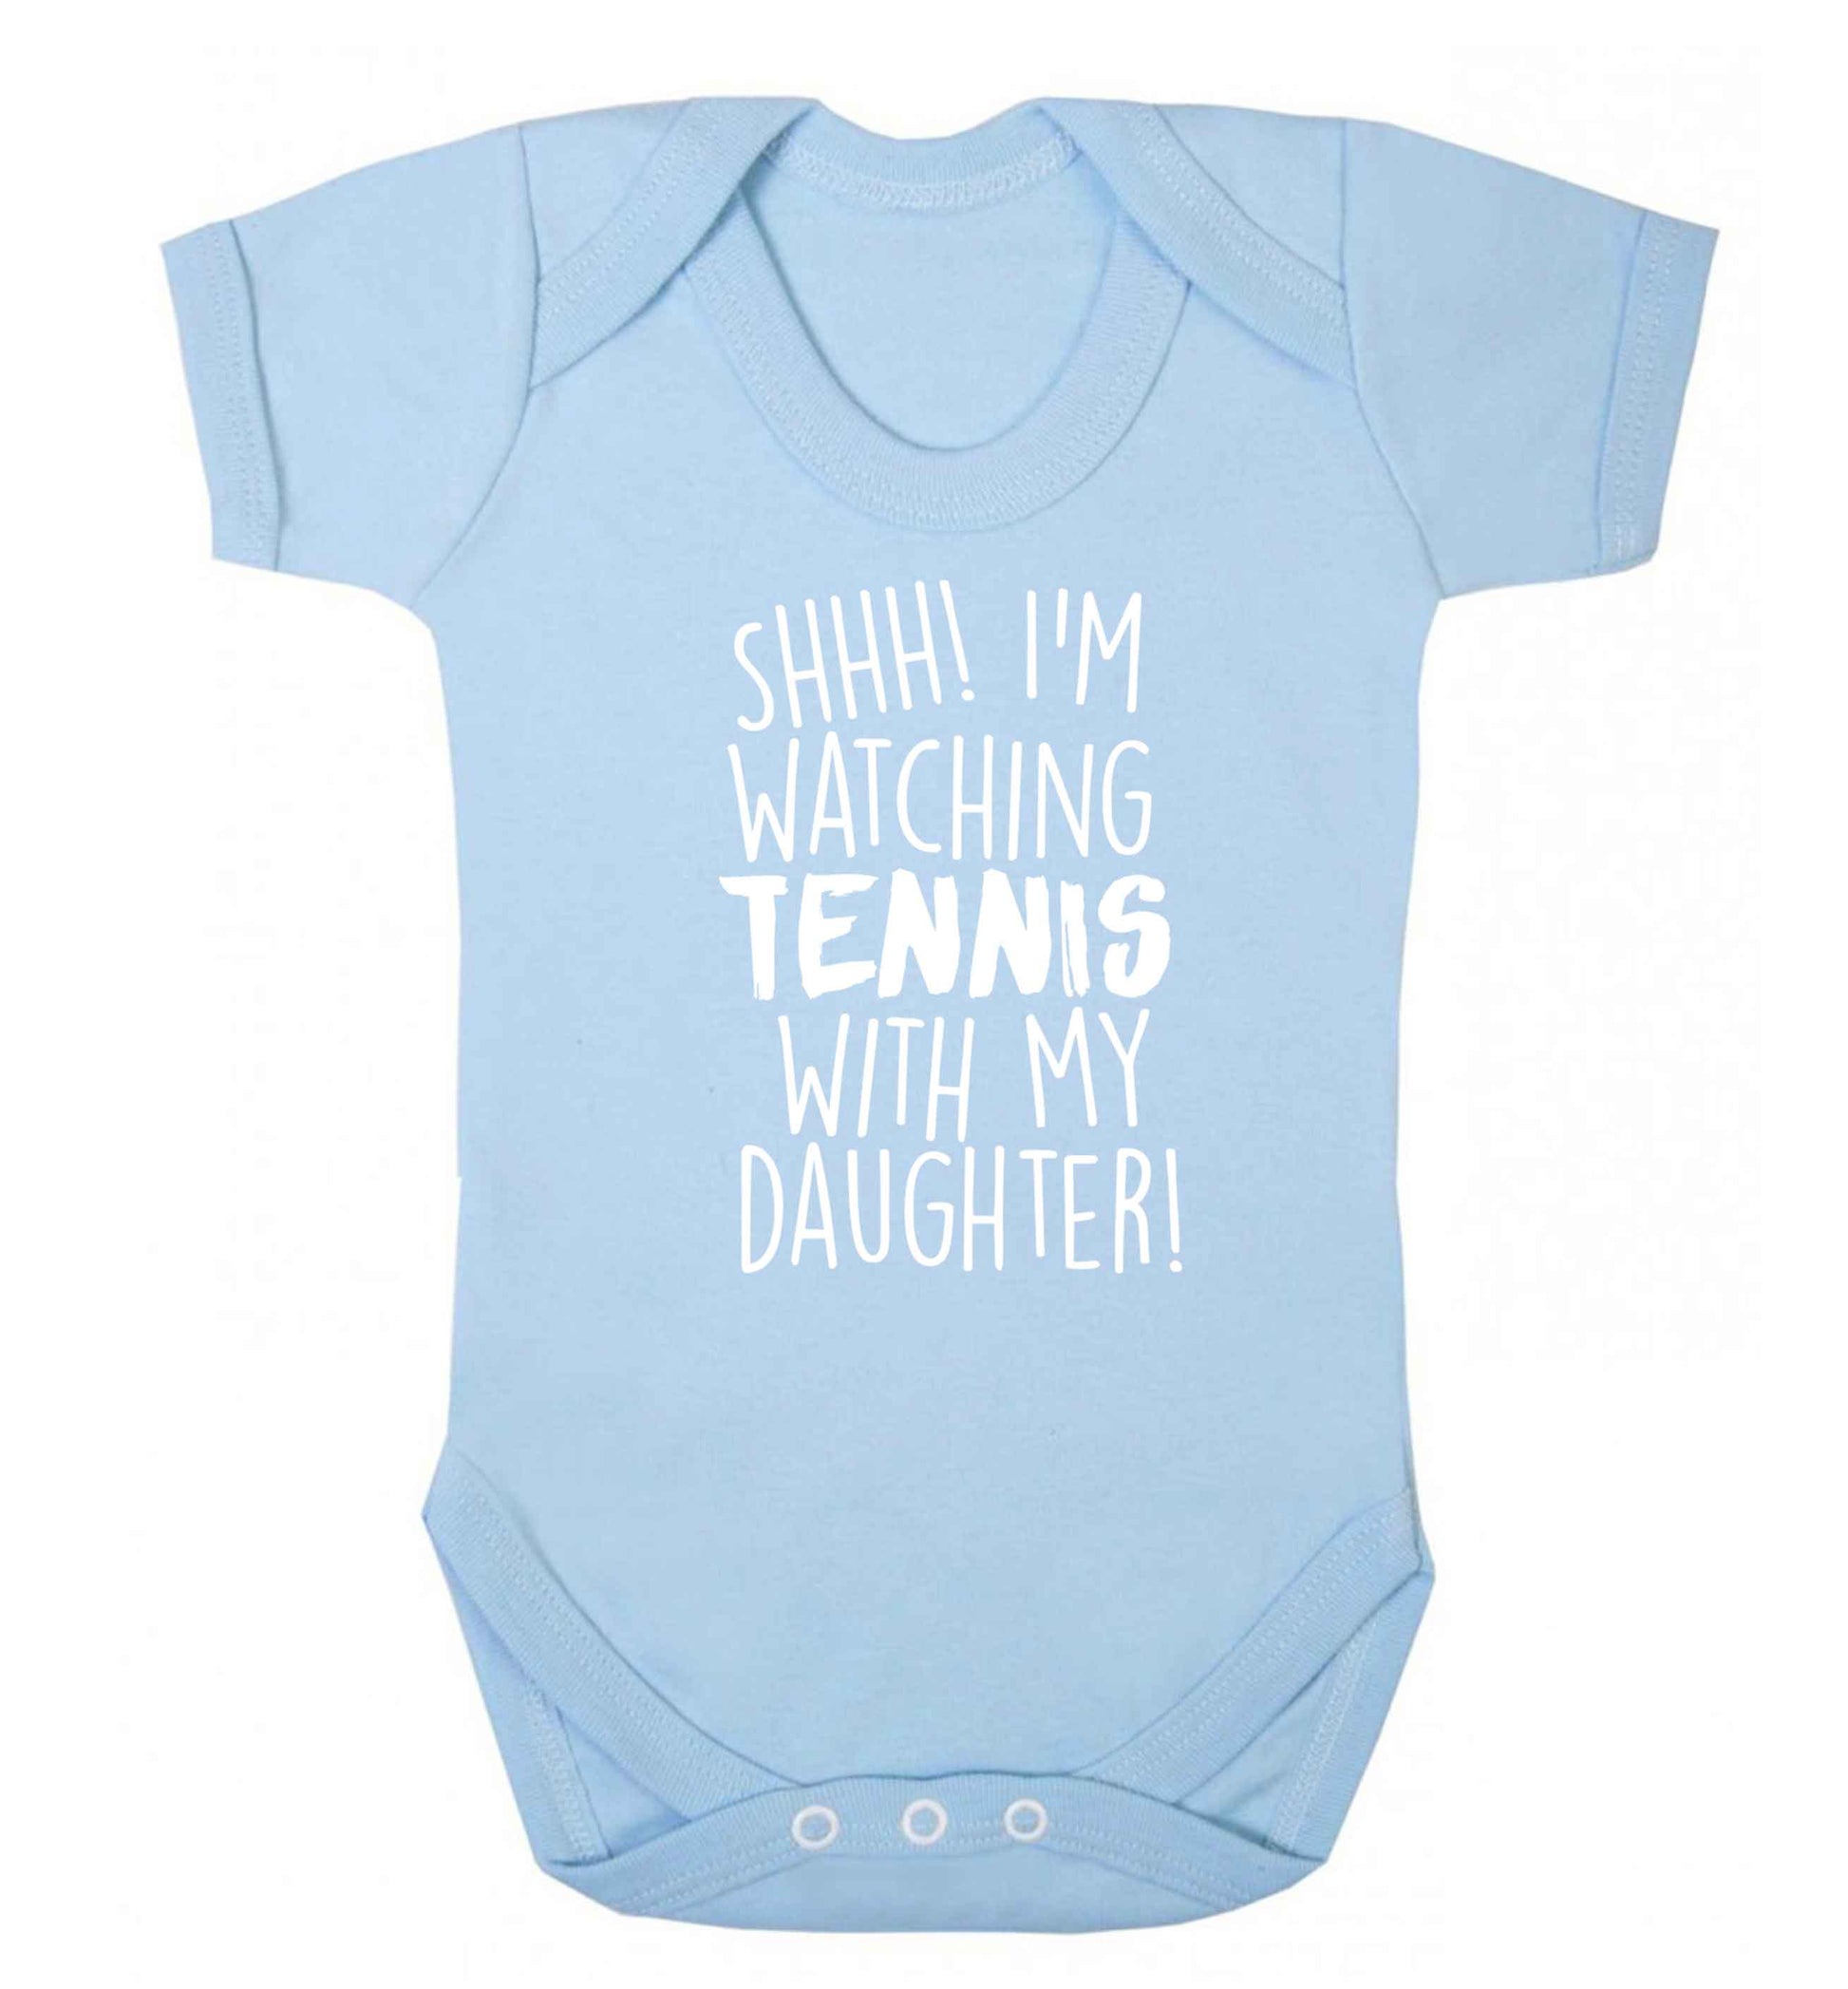 Shh! I'm watching tennis with my daughter! Baby Vest pale blue 18-24 months